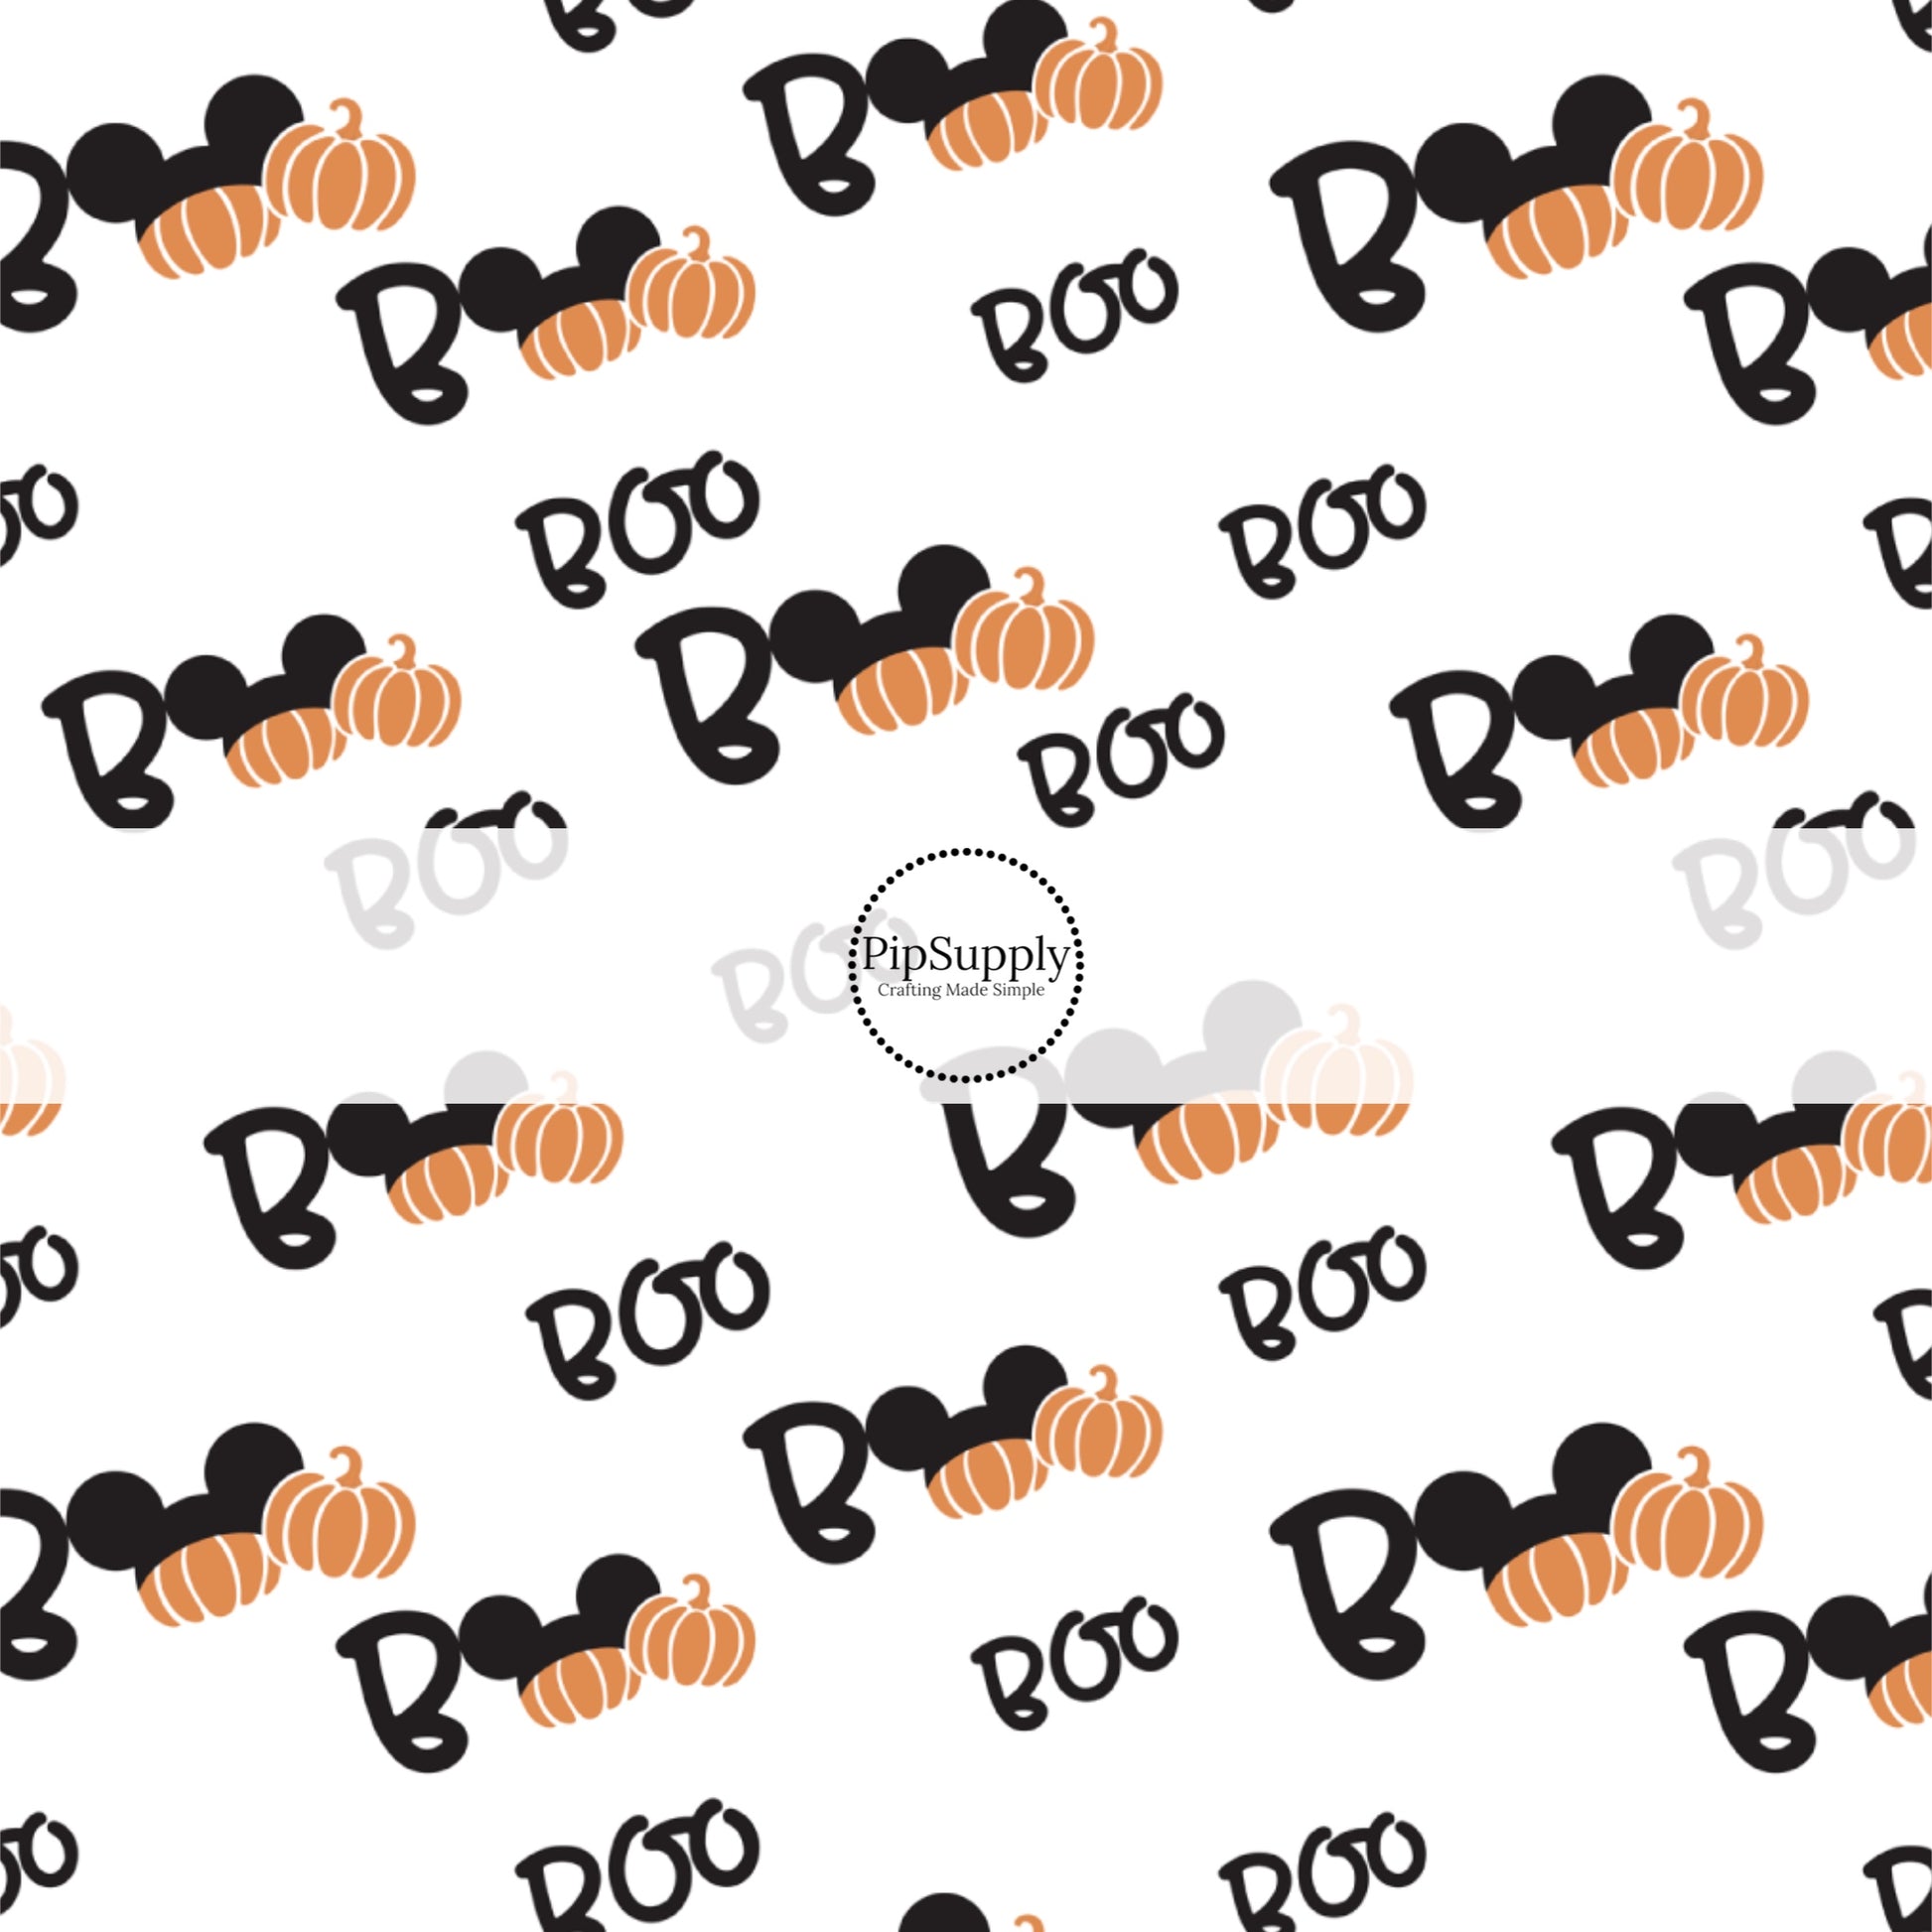 Black writing boo with orange pumpkins and black mouse ears on white hair bow strips